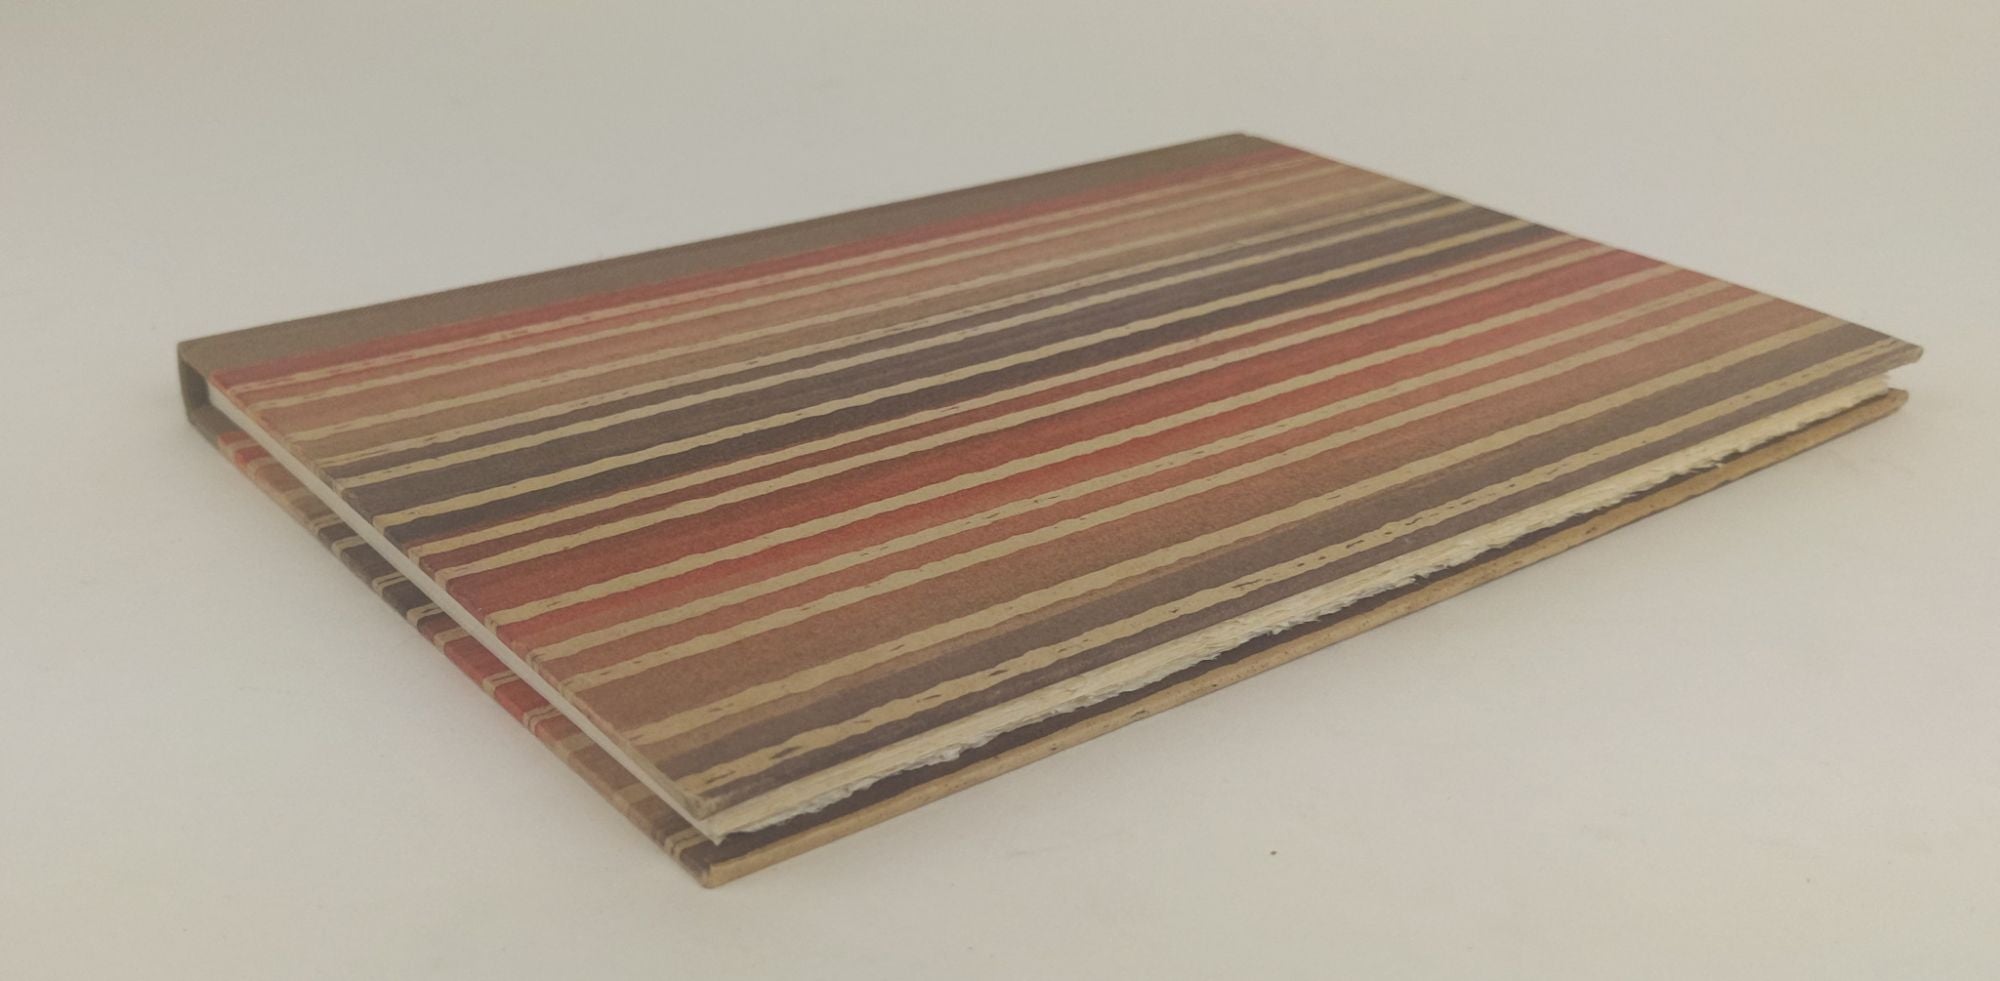 Product Image for POEMS: 1947-1954